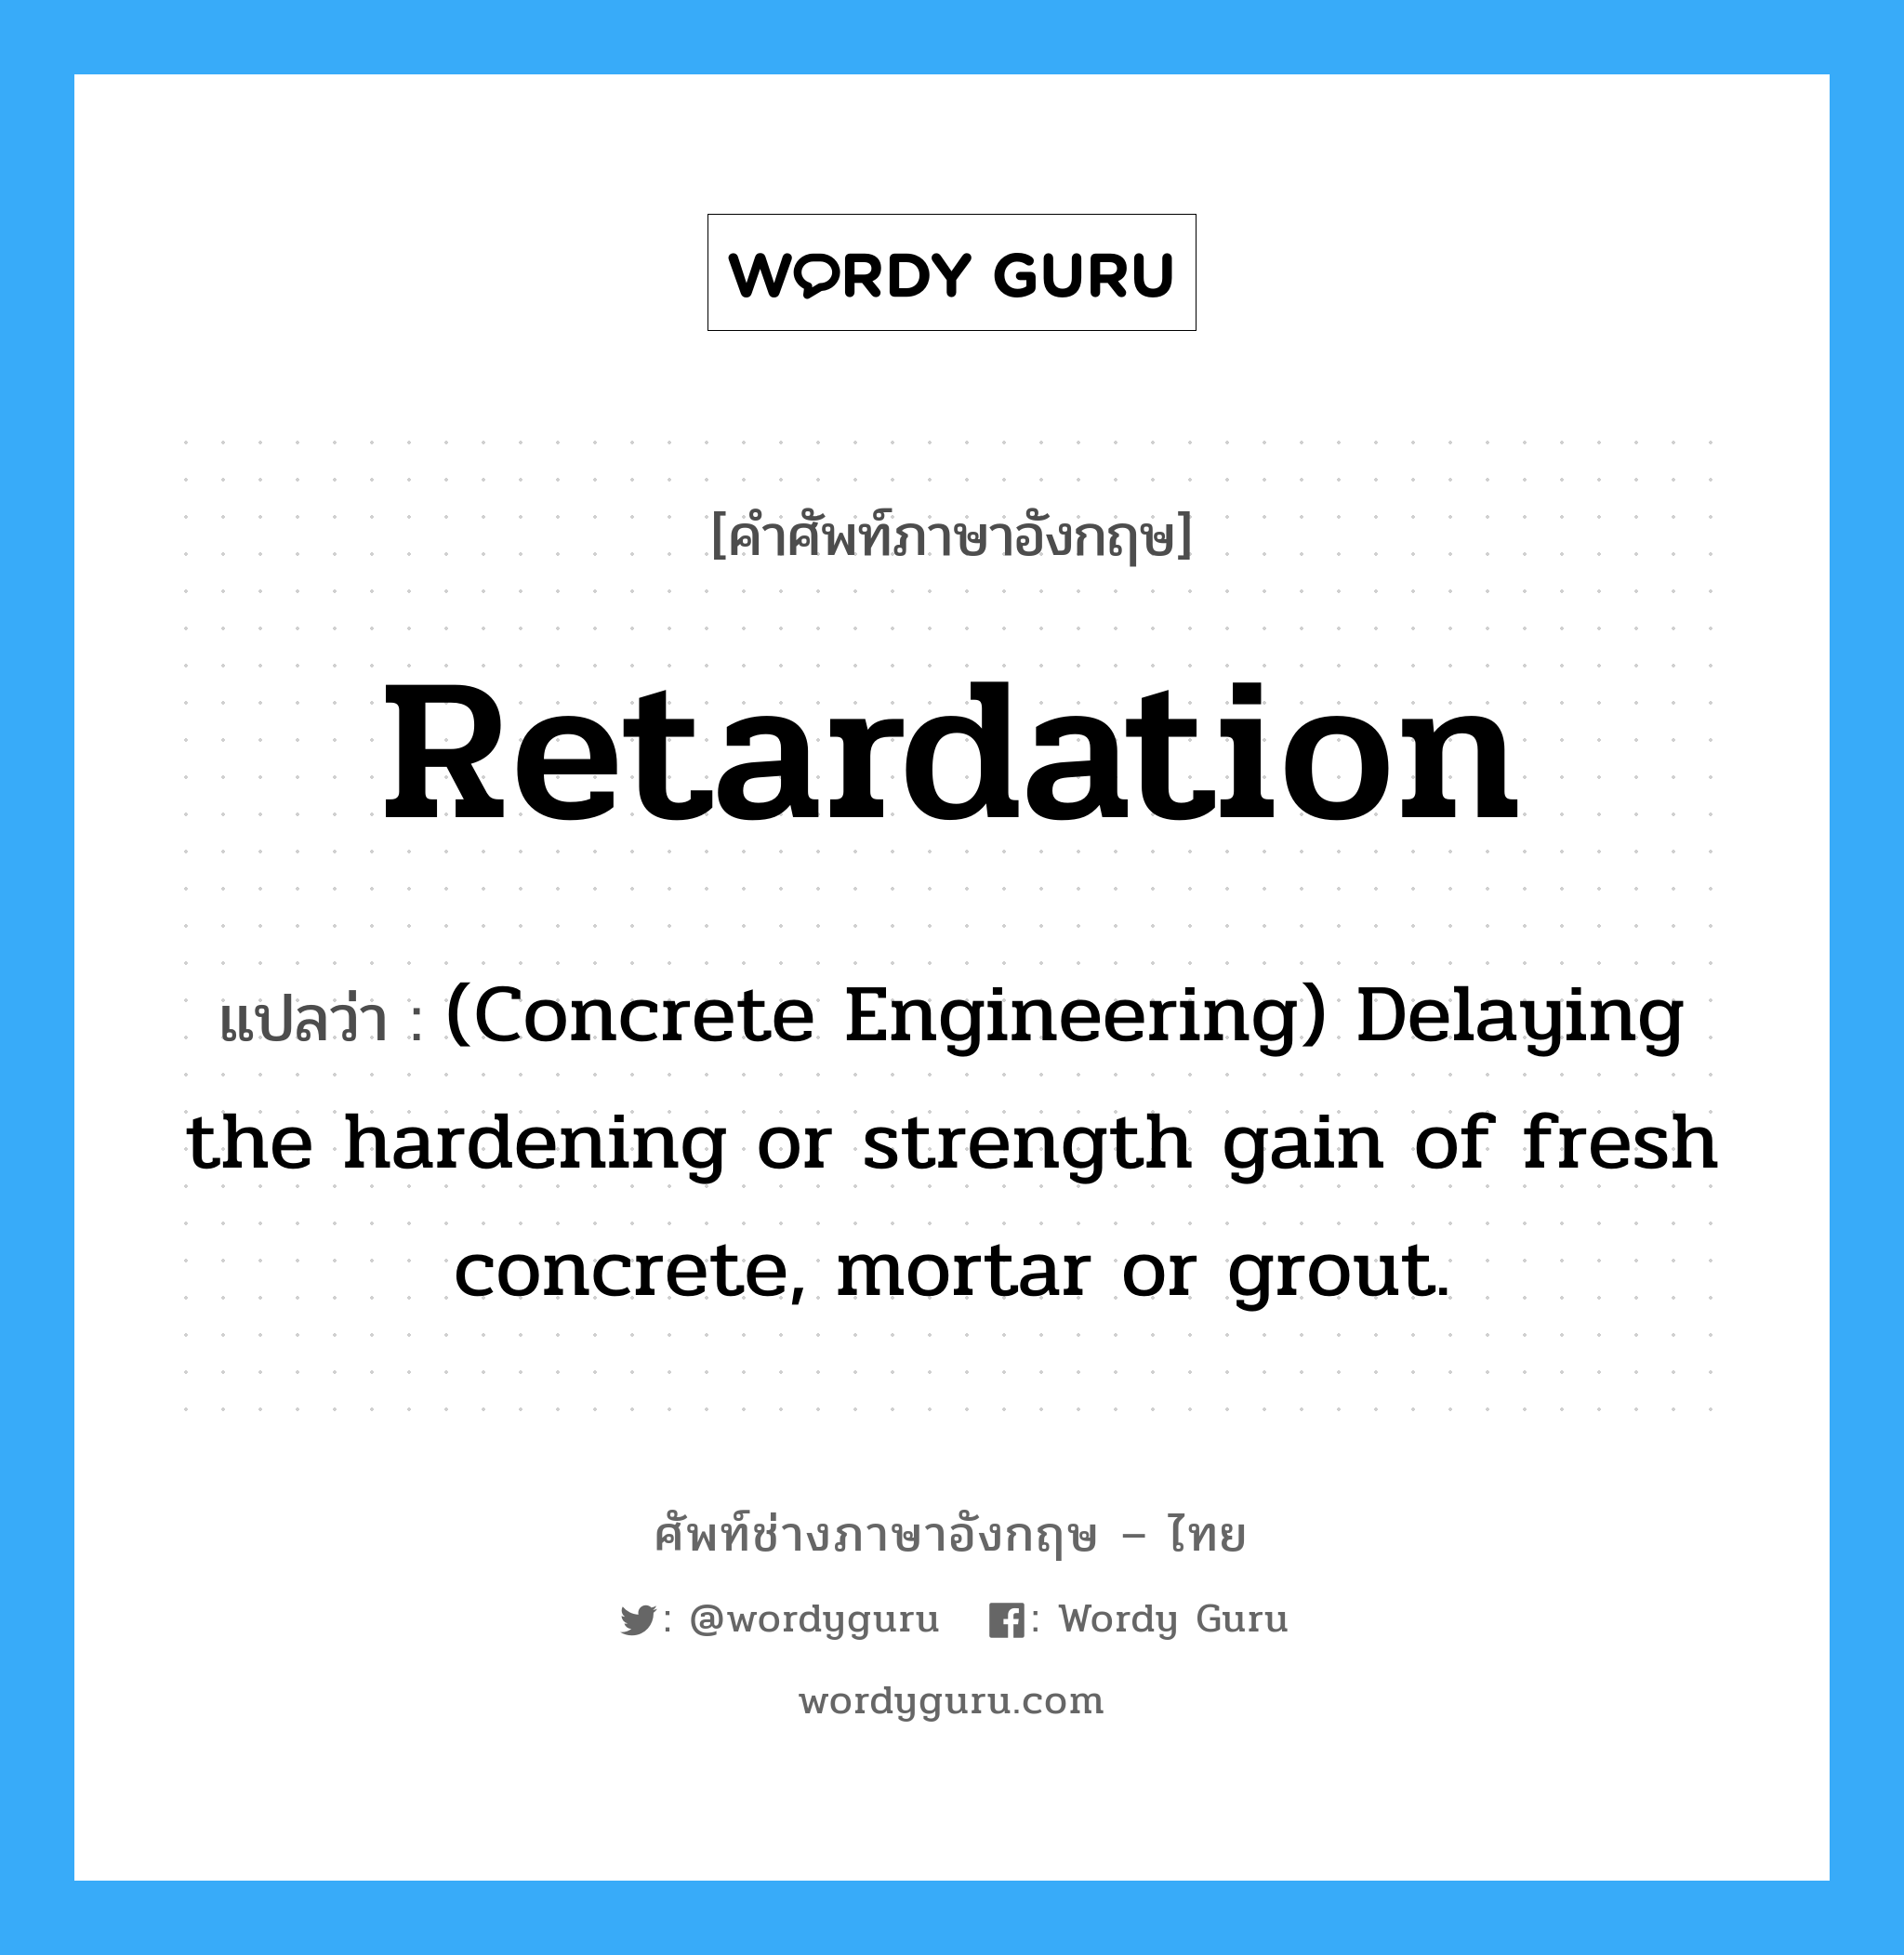 Retardation แปลว่า?, คำศัพท์ช่างภาษาอังกฤษ - ไทย Retardation คำศัพท์ภาษาอังกฤษ Retardation แปลว่า (Concrete Engineering) Delaying the hardening or strength gain of fresh concrete, mortar or grout.